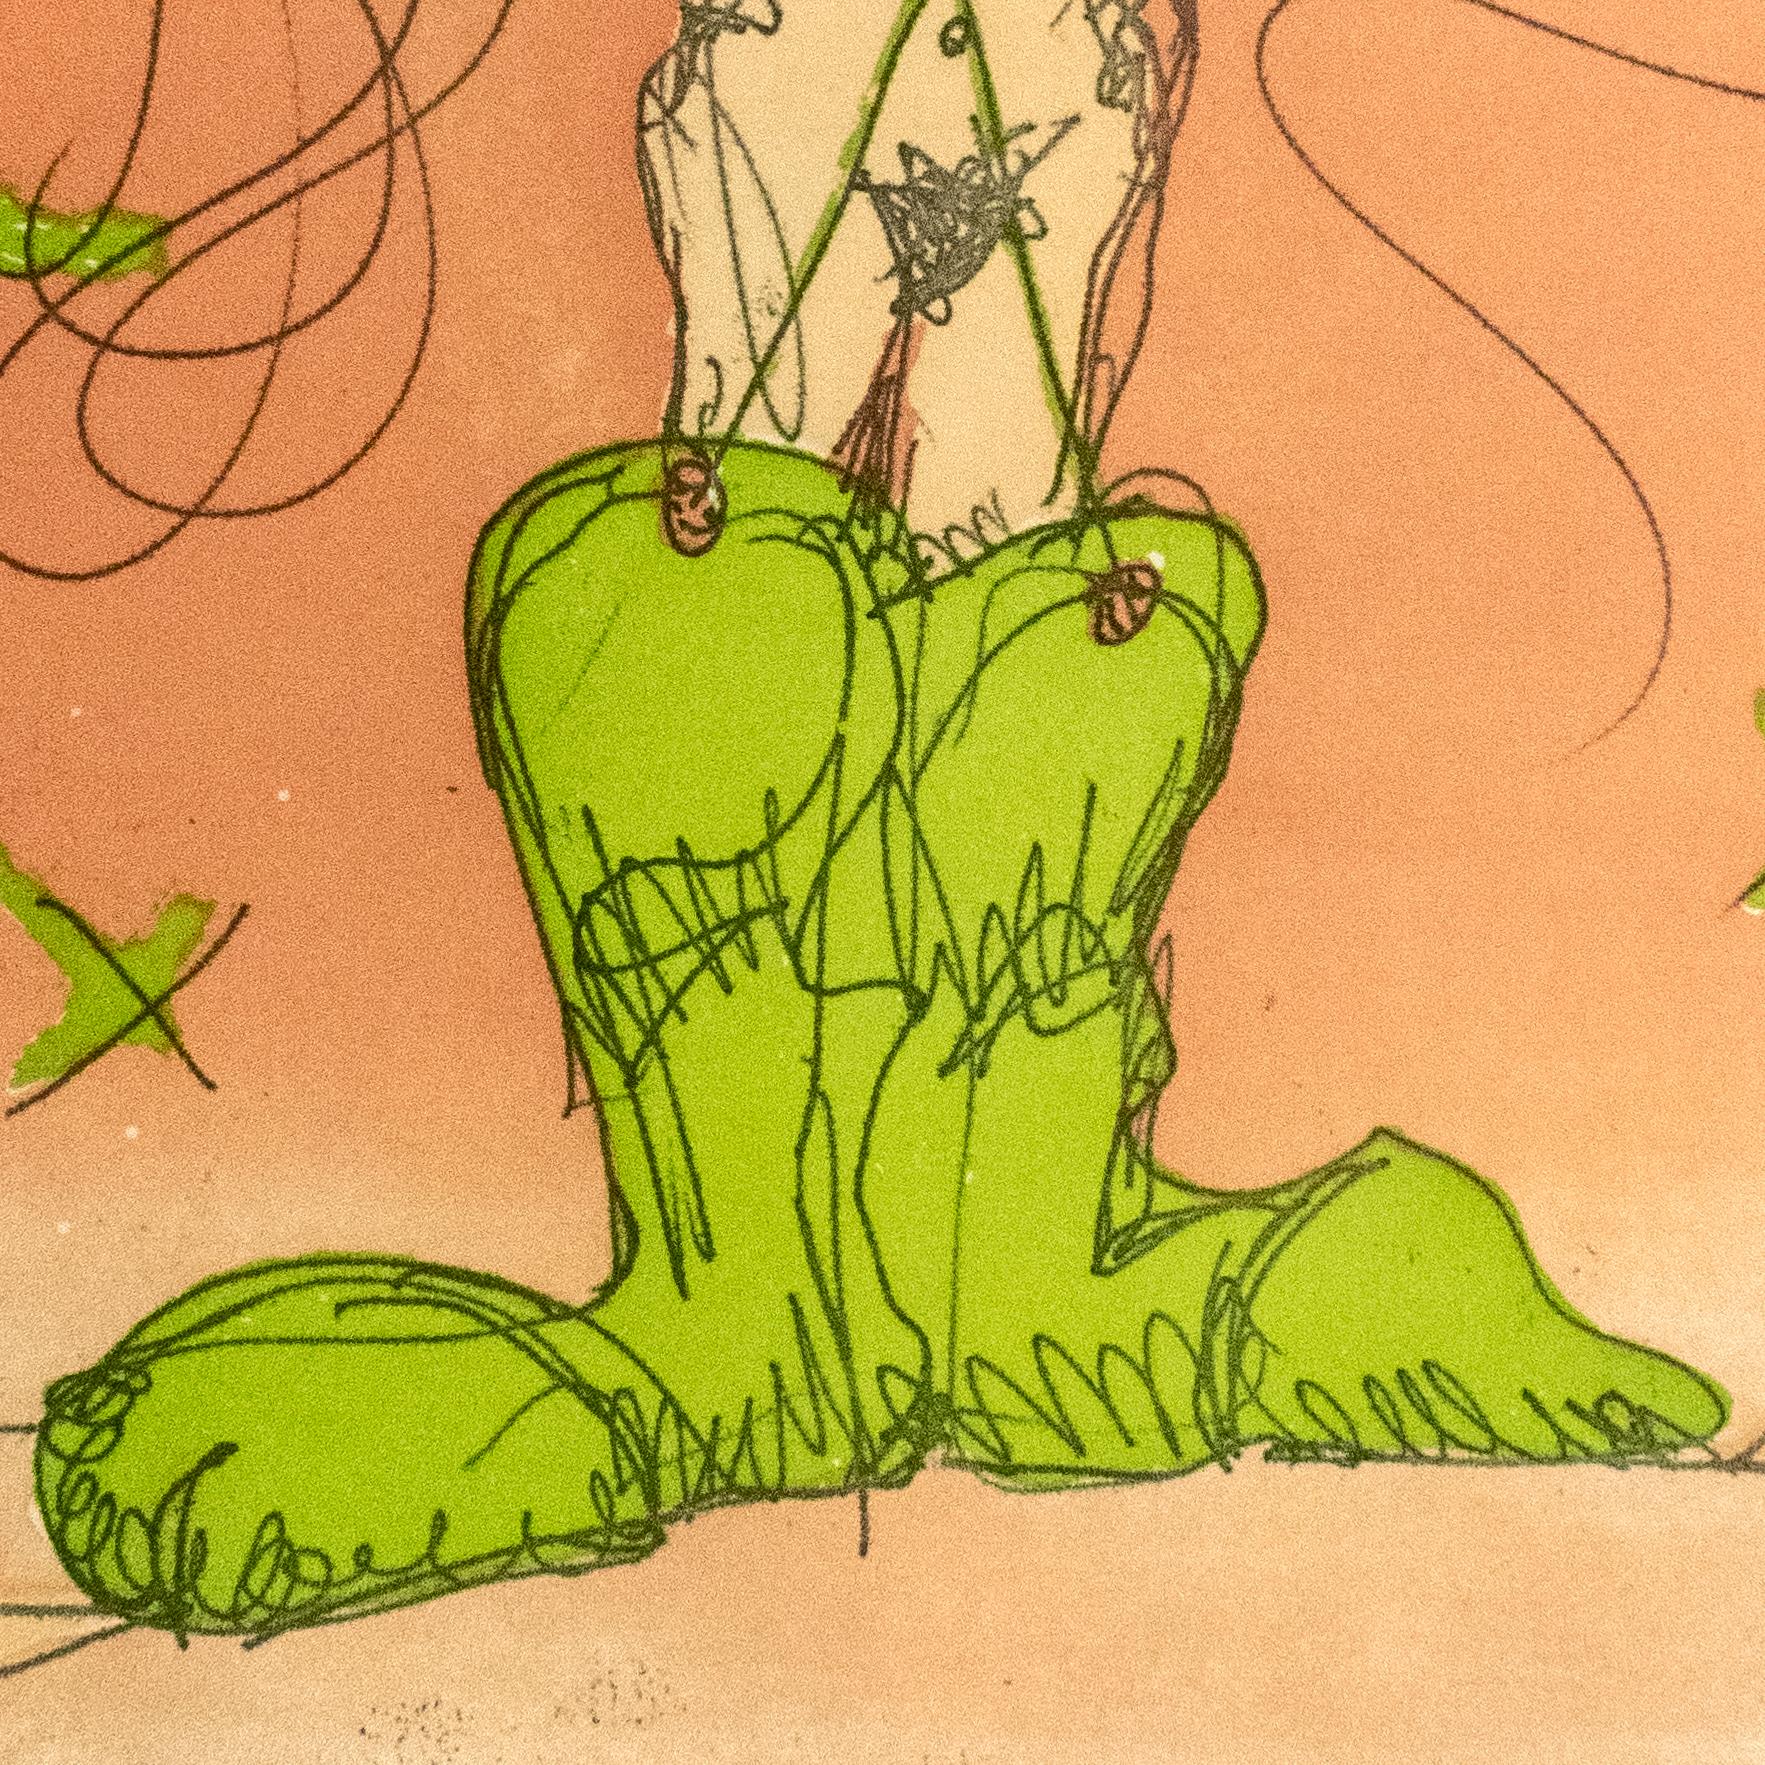 This playful, erotic print by Claes Oldenburg features a nude woman in outsized lime green cowboy boots standing with hands on hips. Wild lines radiating from the crown of her head are accented with bright green to form a wide hat, against a peach